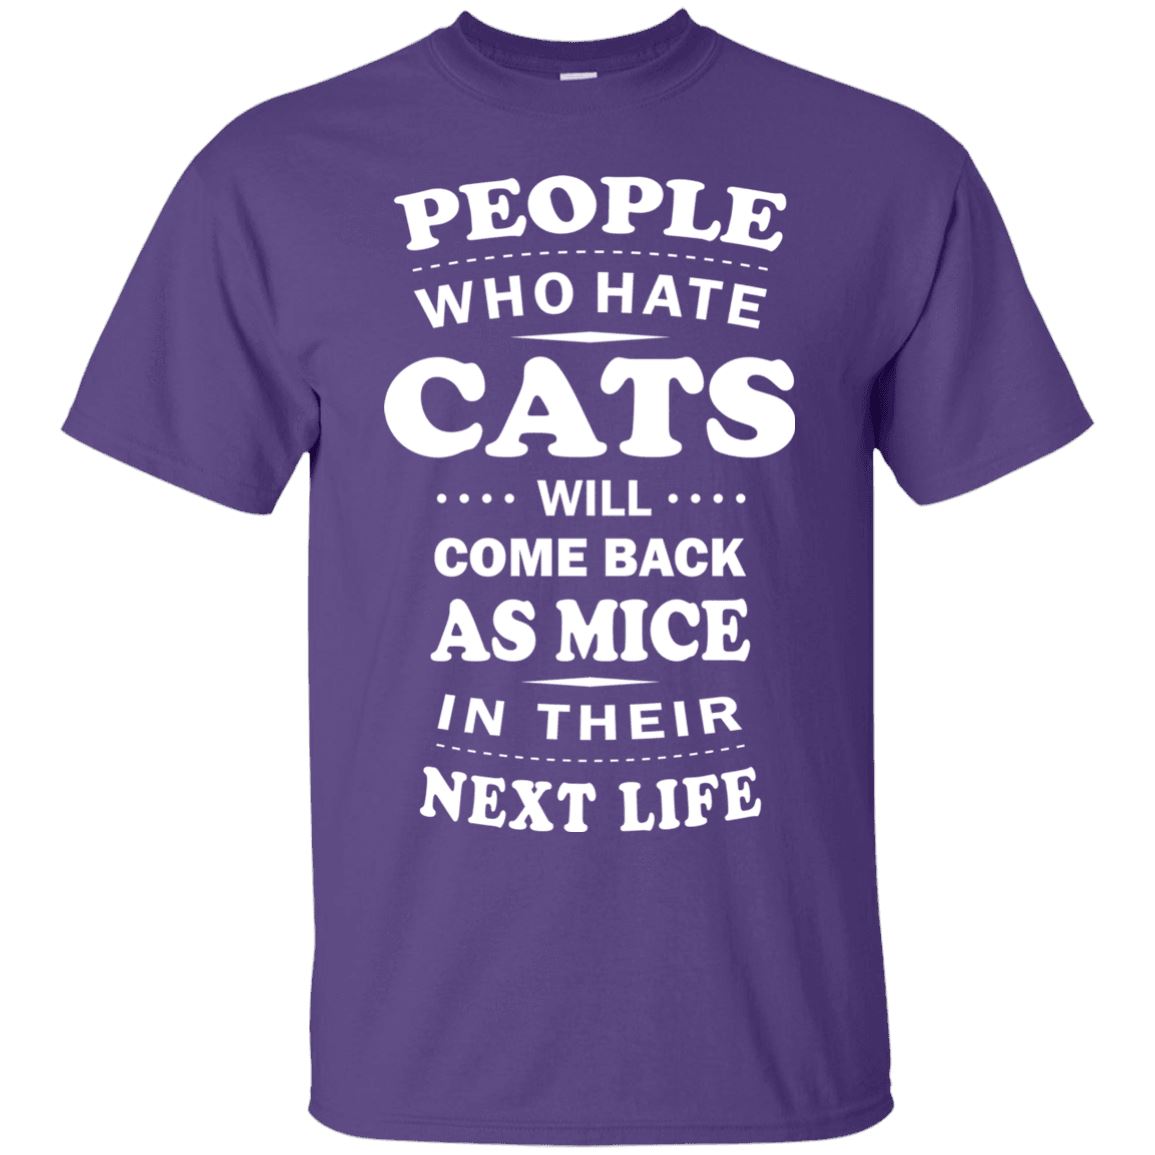 People Who Hate Cats Will Come Back As Mice - Cat Shirt